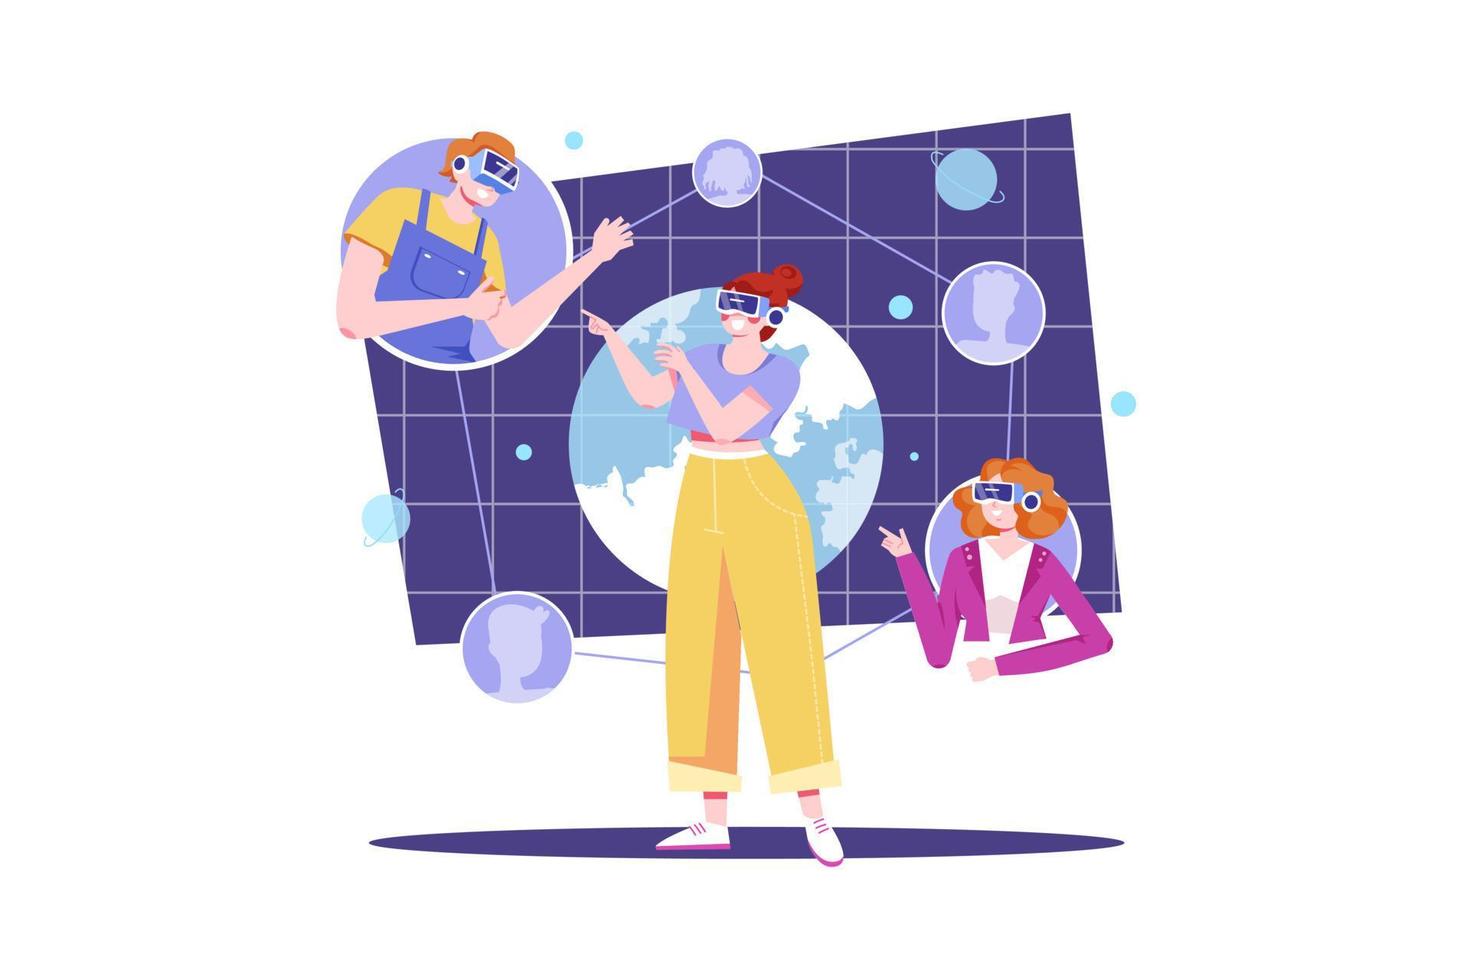 People connecting in the metaverse Illustration concept. Flat illustration isolated on white background vector